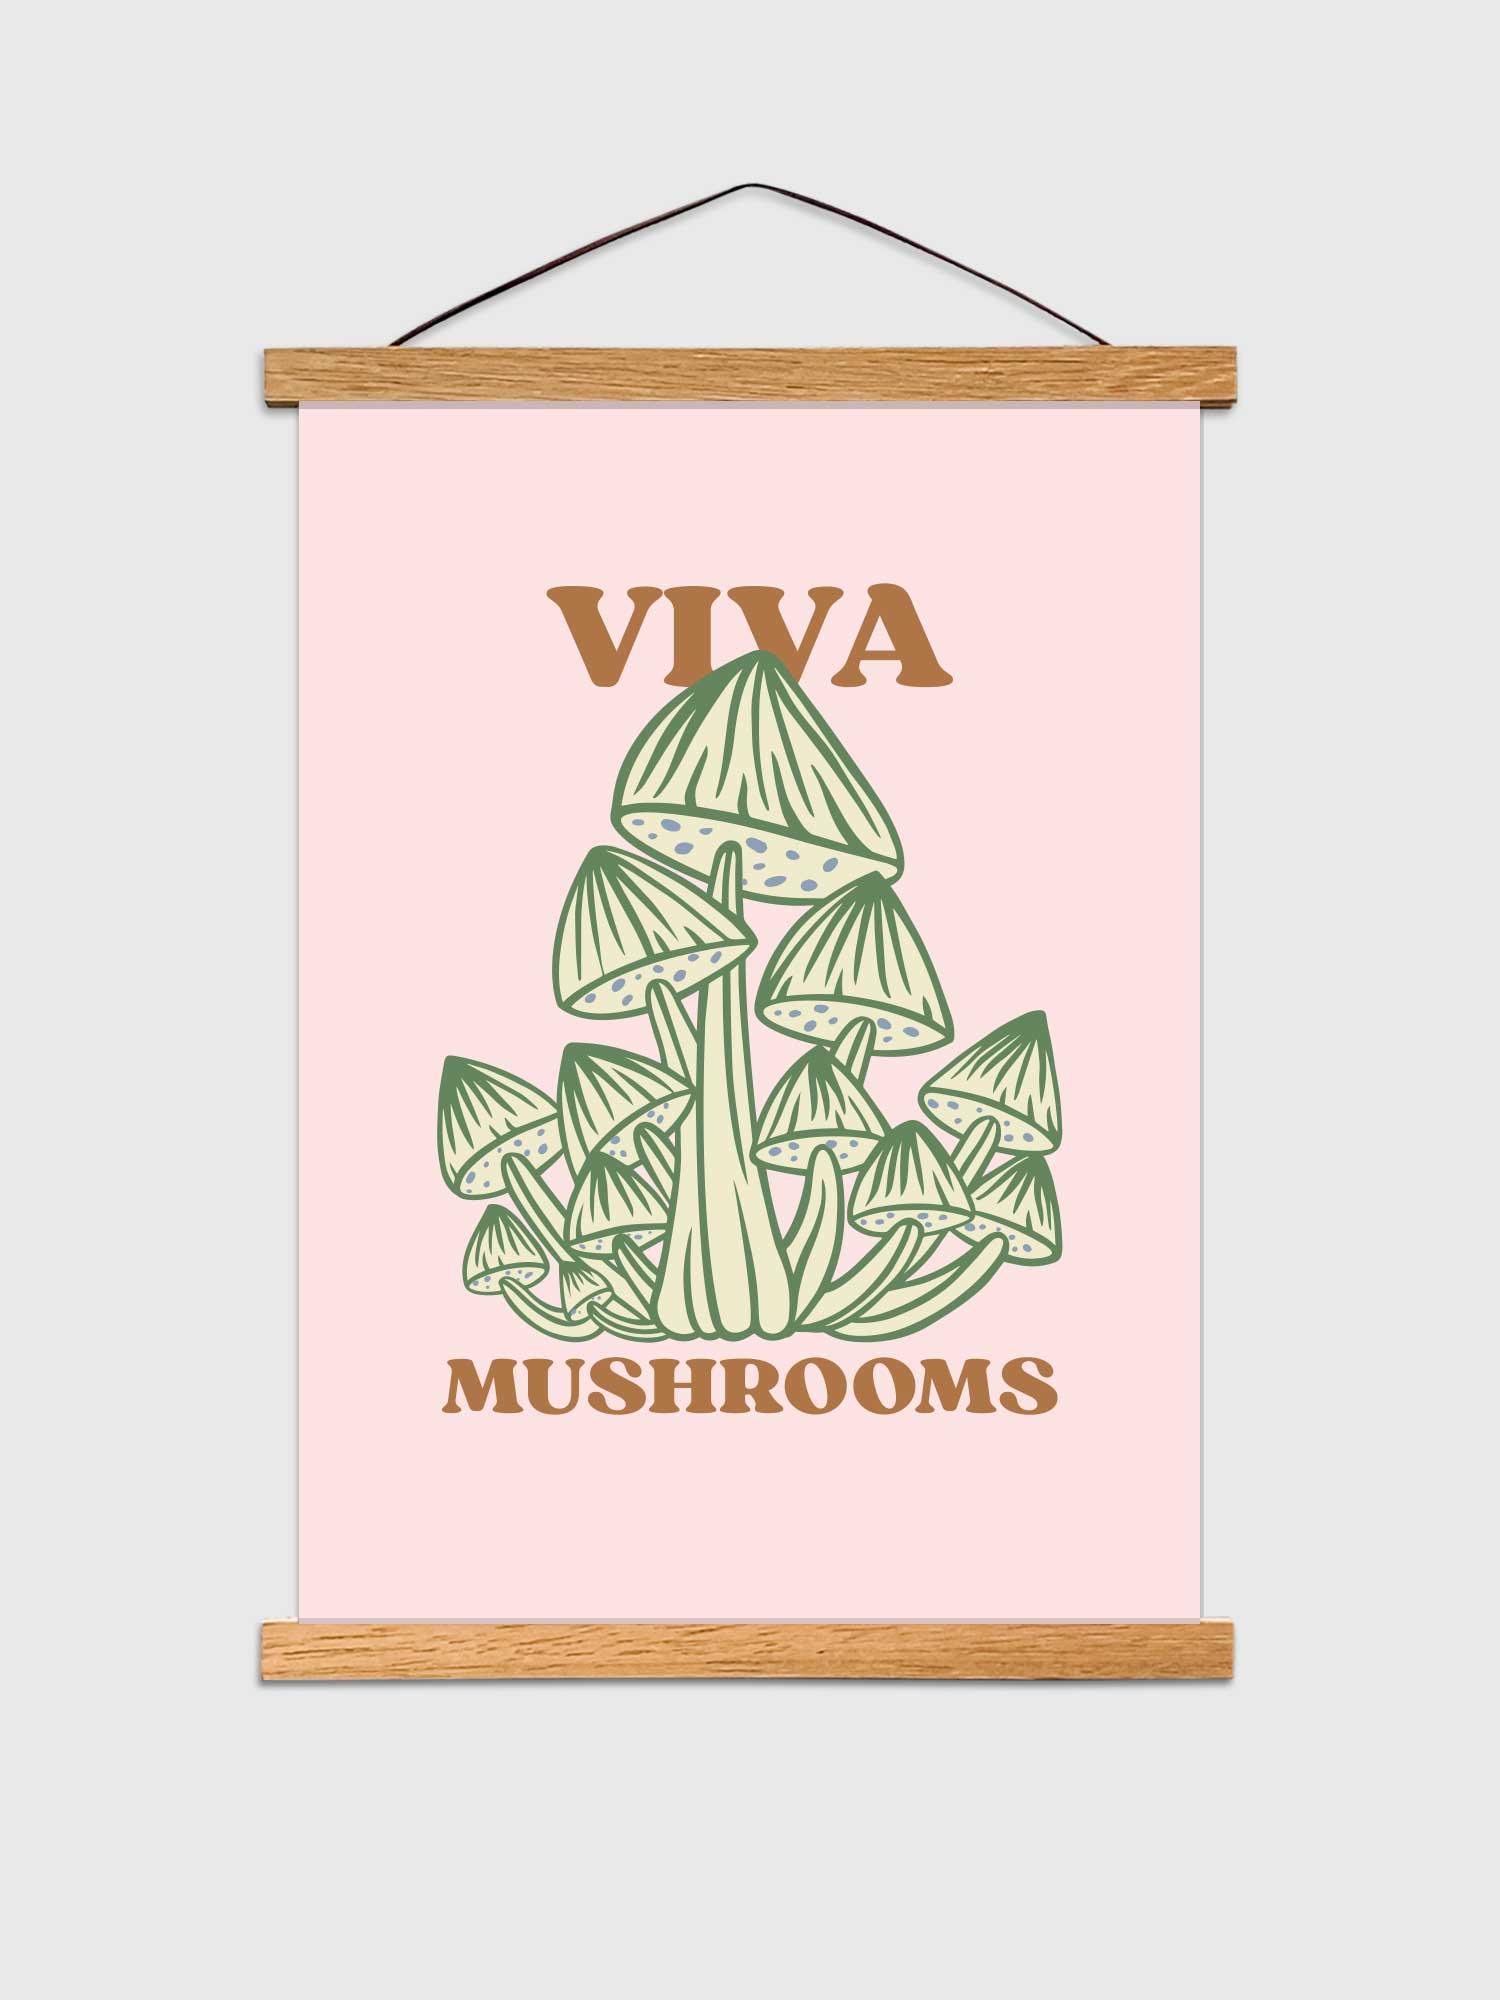 viva mushrooms is our graphic take on the magic mushrooms and plastic eating fungi